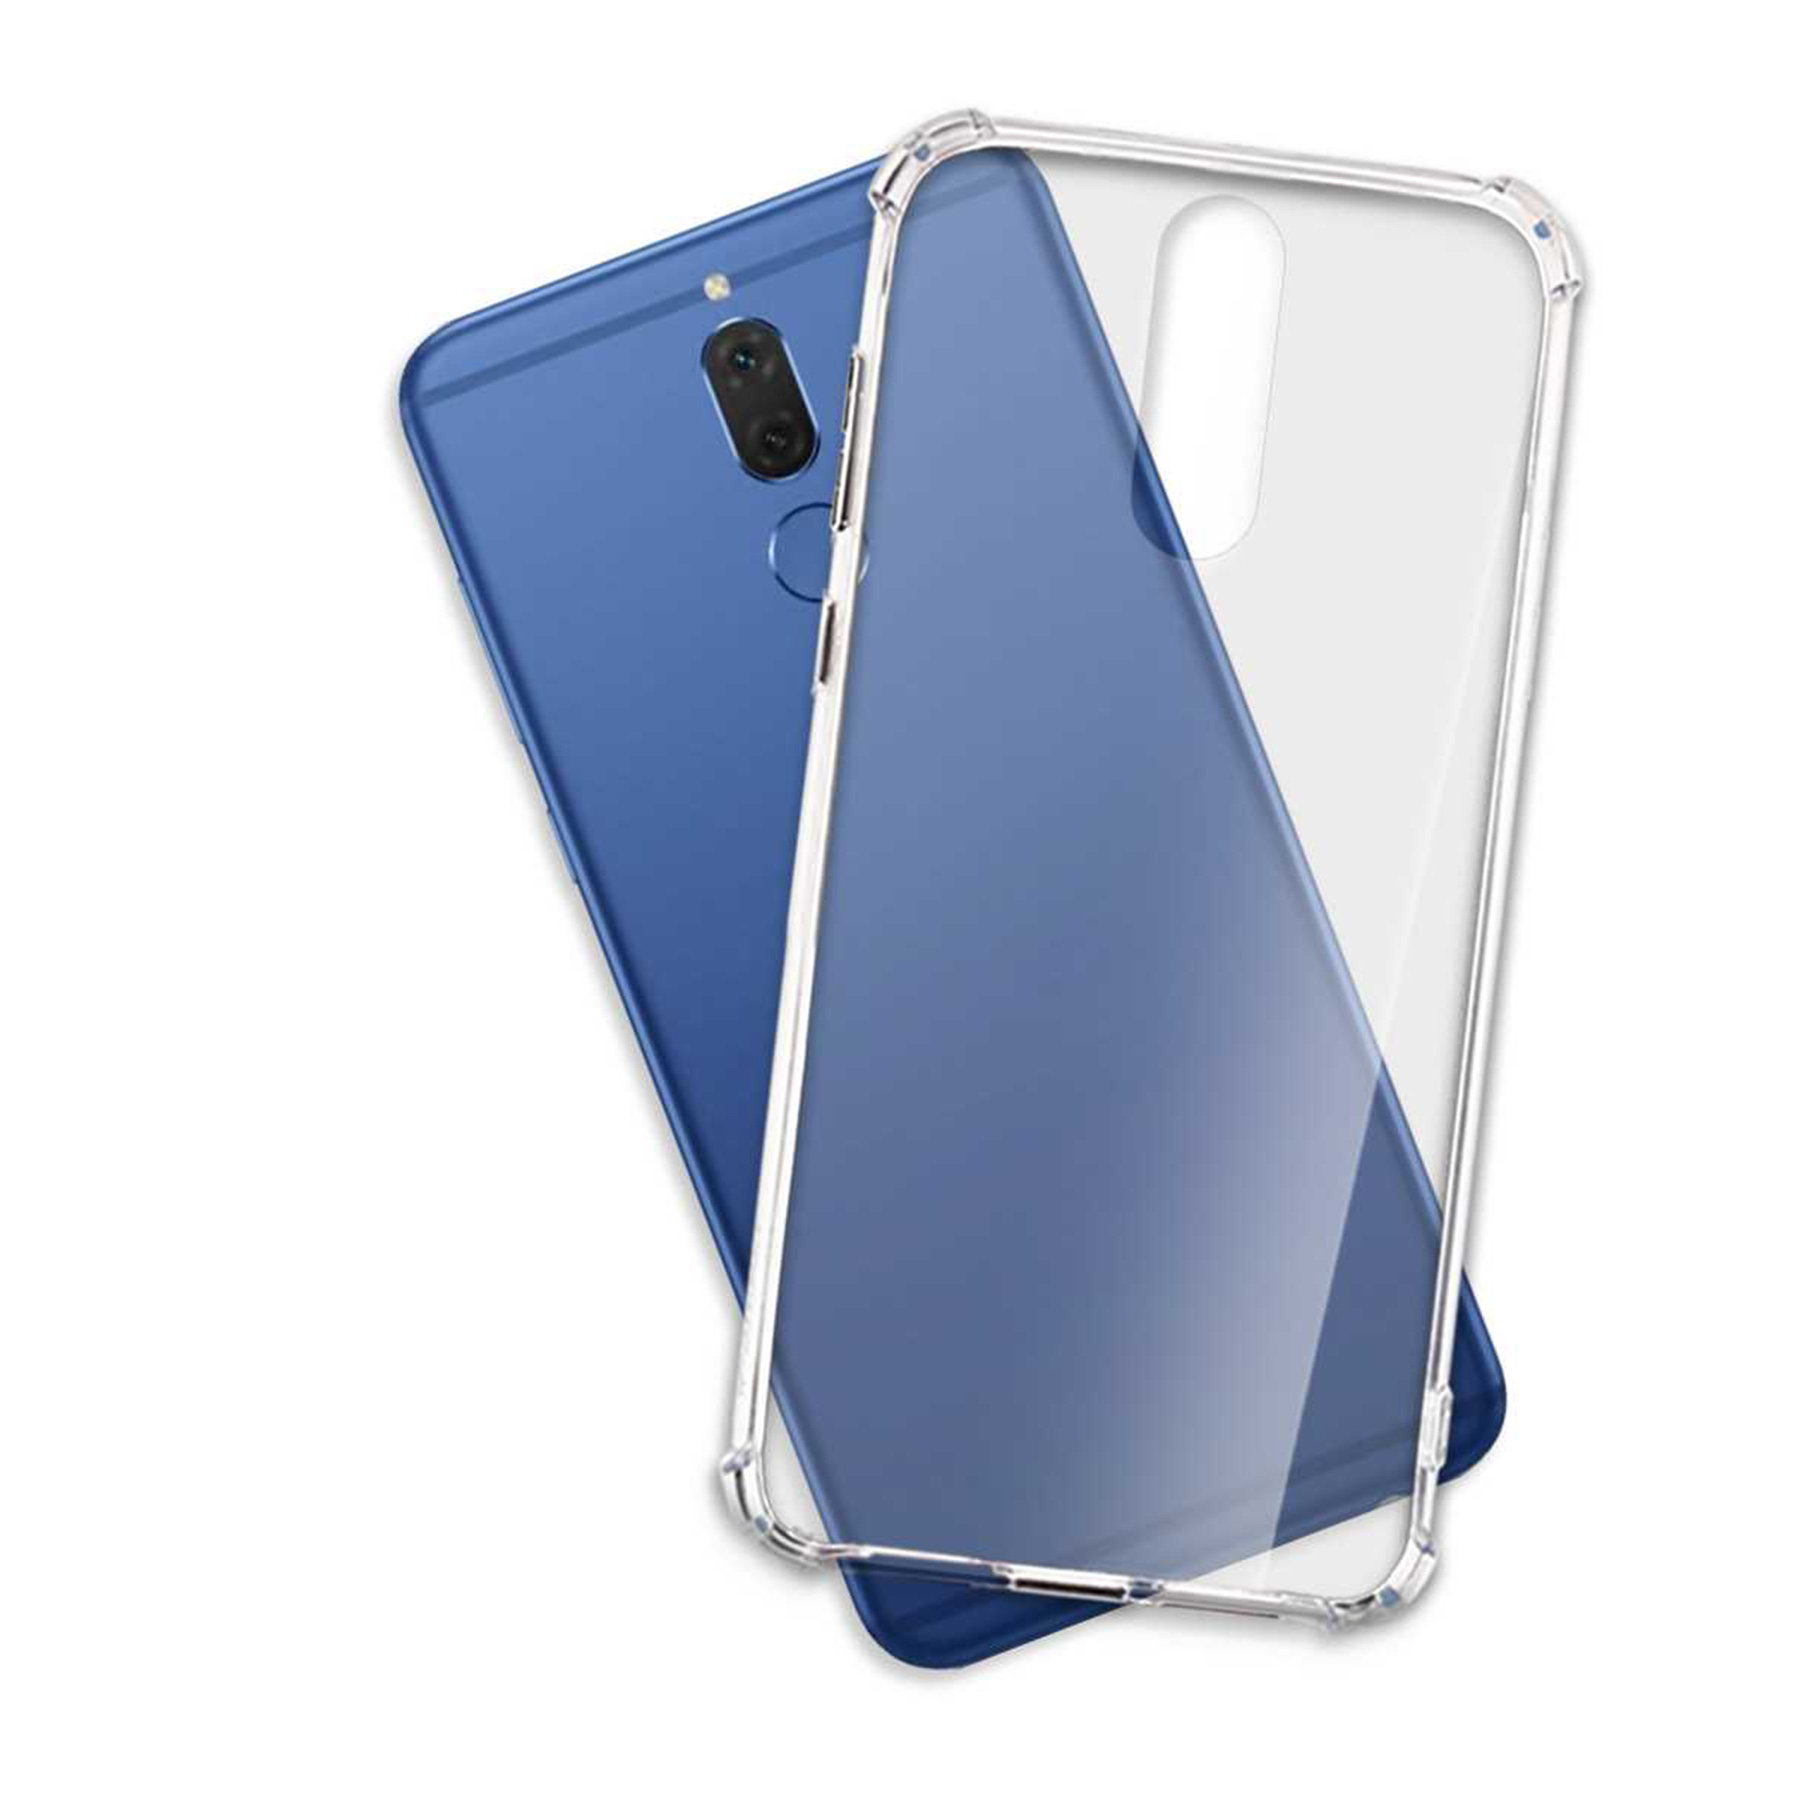 Backcover, Huawei, Transparent Case, Lite, MTB Clear ENERGY Mate 10 Armor MORE